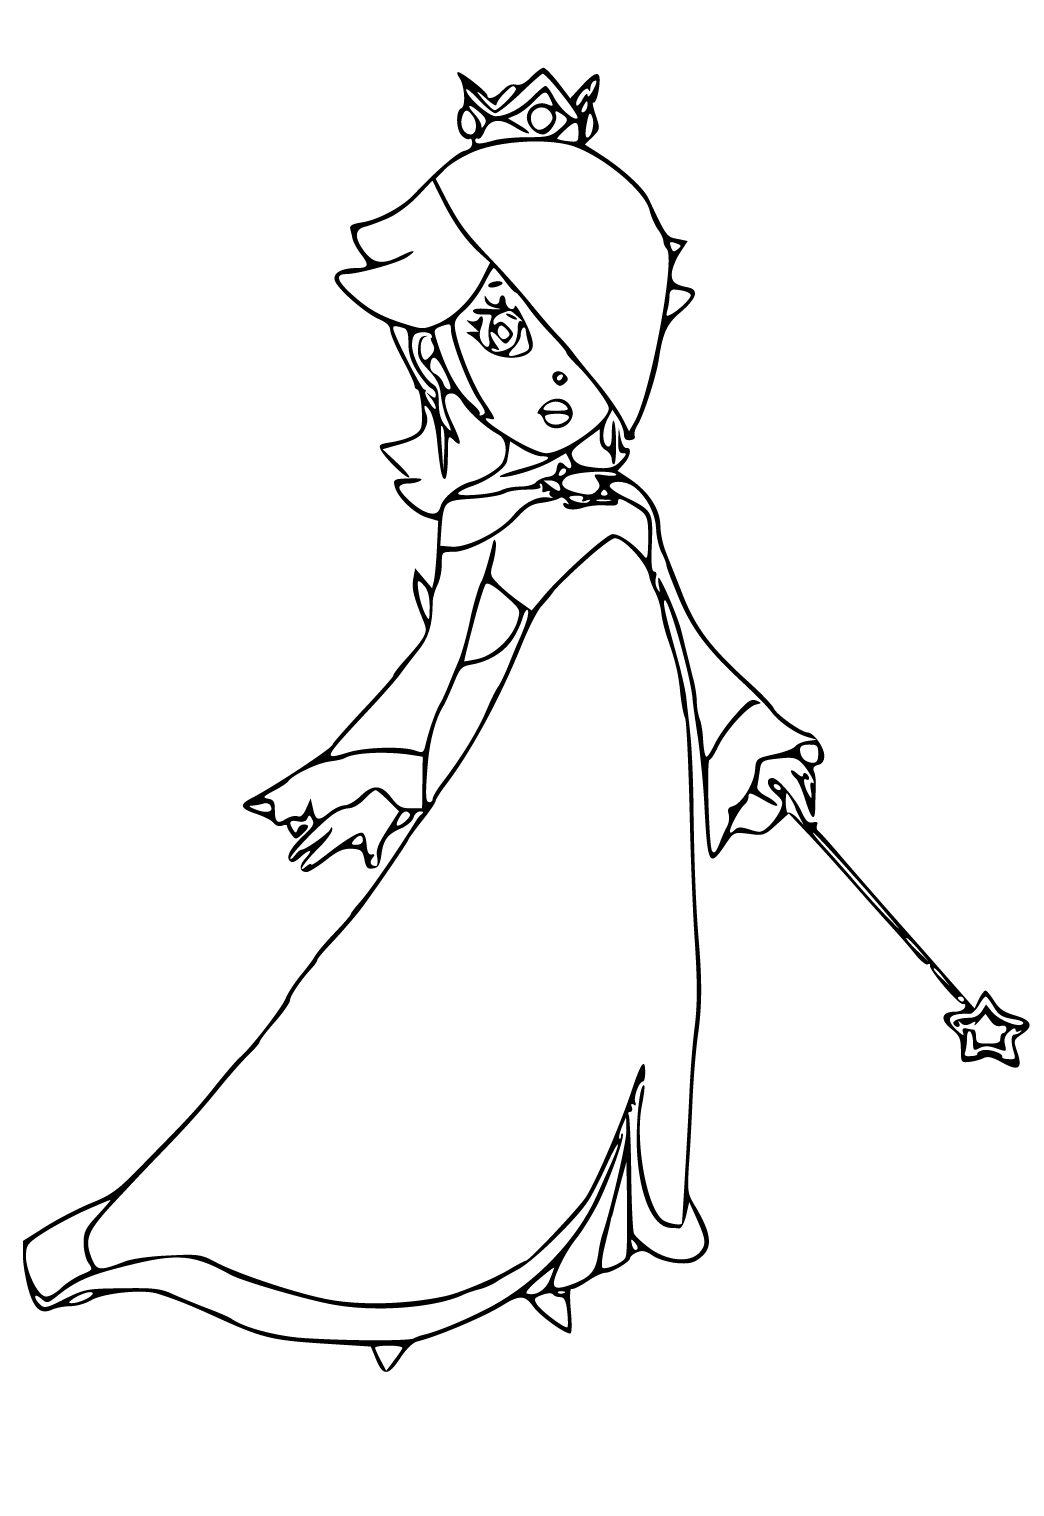 Free printable rosalina crown coloring page for adults and kids